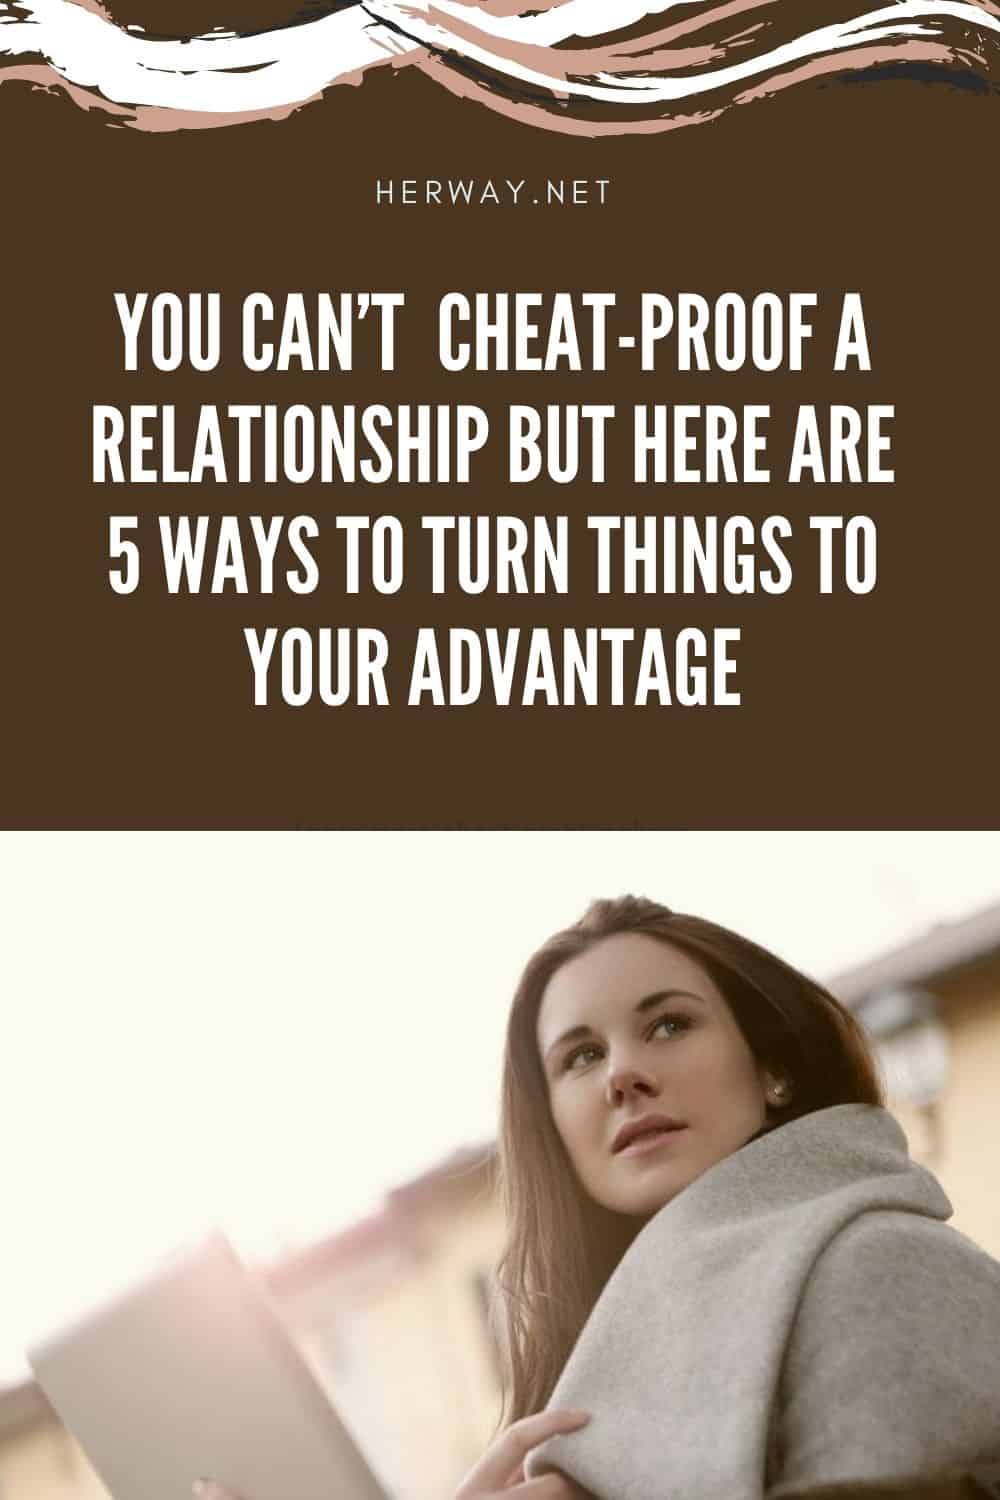 You Can’t Cheat-Proof A Relationship But Here Are 5 Ways To Turn Things To Your Advantage